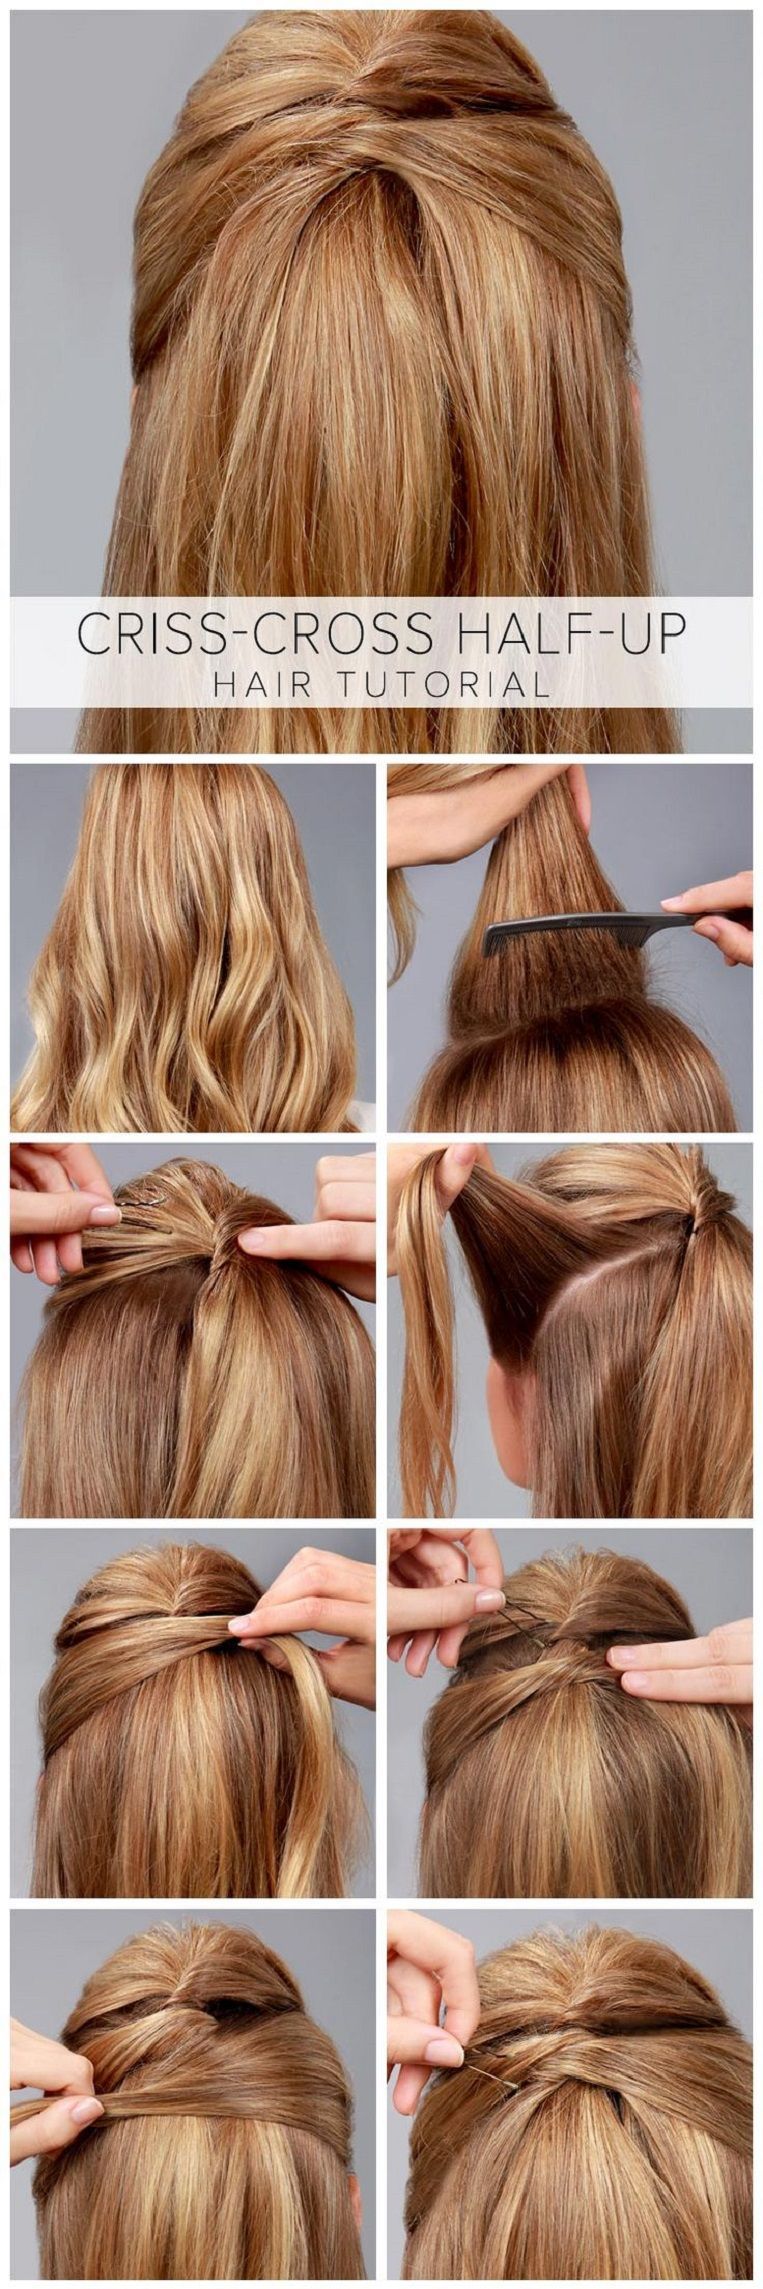 Criss-Cross 3Half-Up 3Hair Tutorial – 13 Easy #Tutorials to Look Polished and Professional at Work |